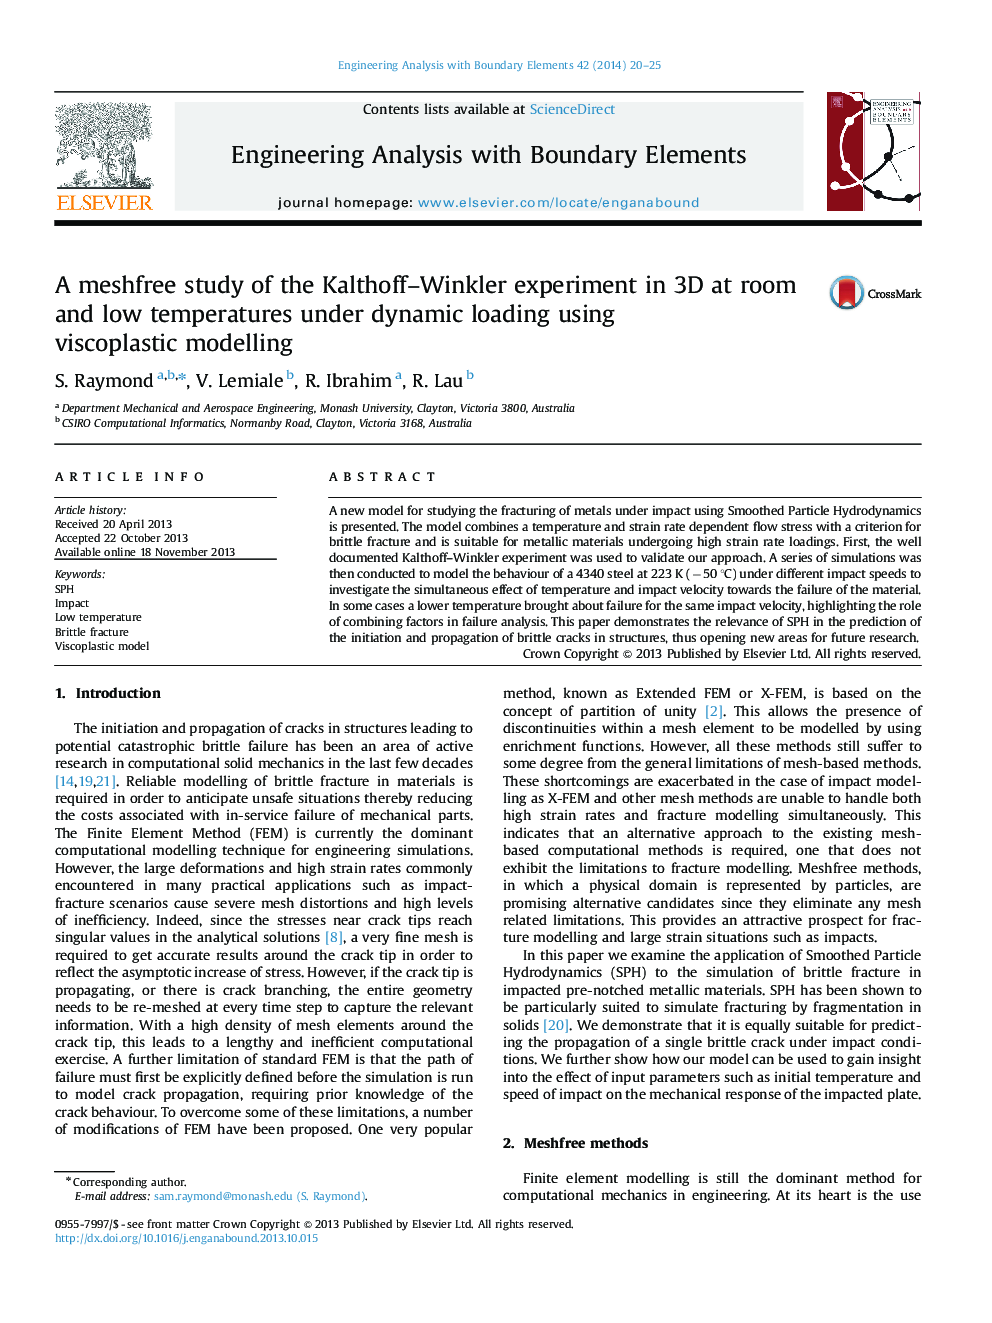 A meshfree study of the Kalthoff–Winkler experiment in 3D at room and low temperatures under dynamic loading using viscoplastic modelling